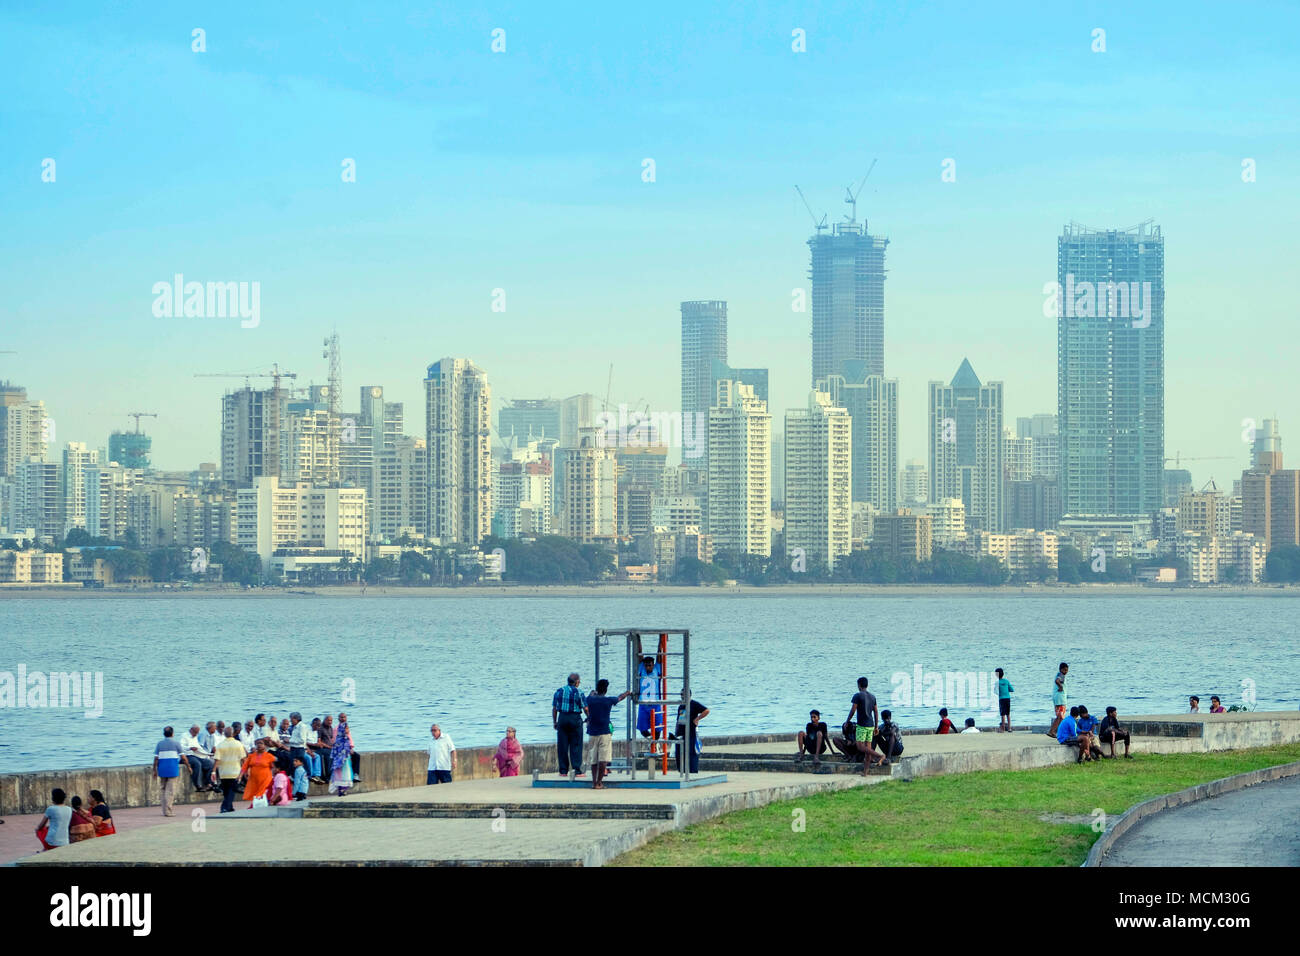 View of the BWSL Promenade in Bandra with the Mahim Bay, the Arabian Sea and the Dadar district of Mumbai in the background Stock Photo